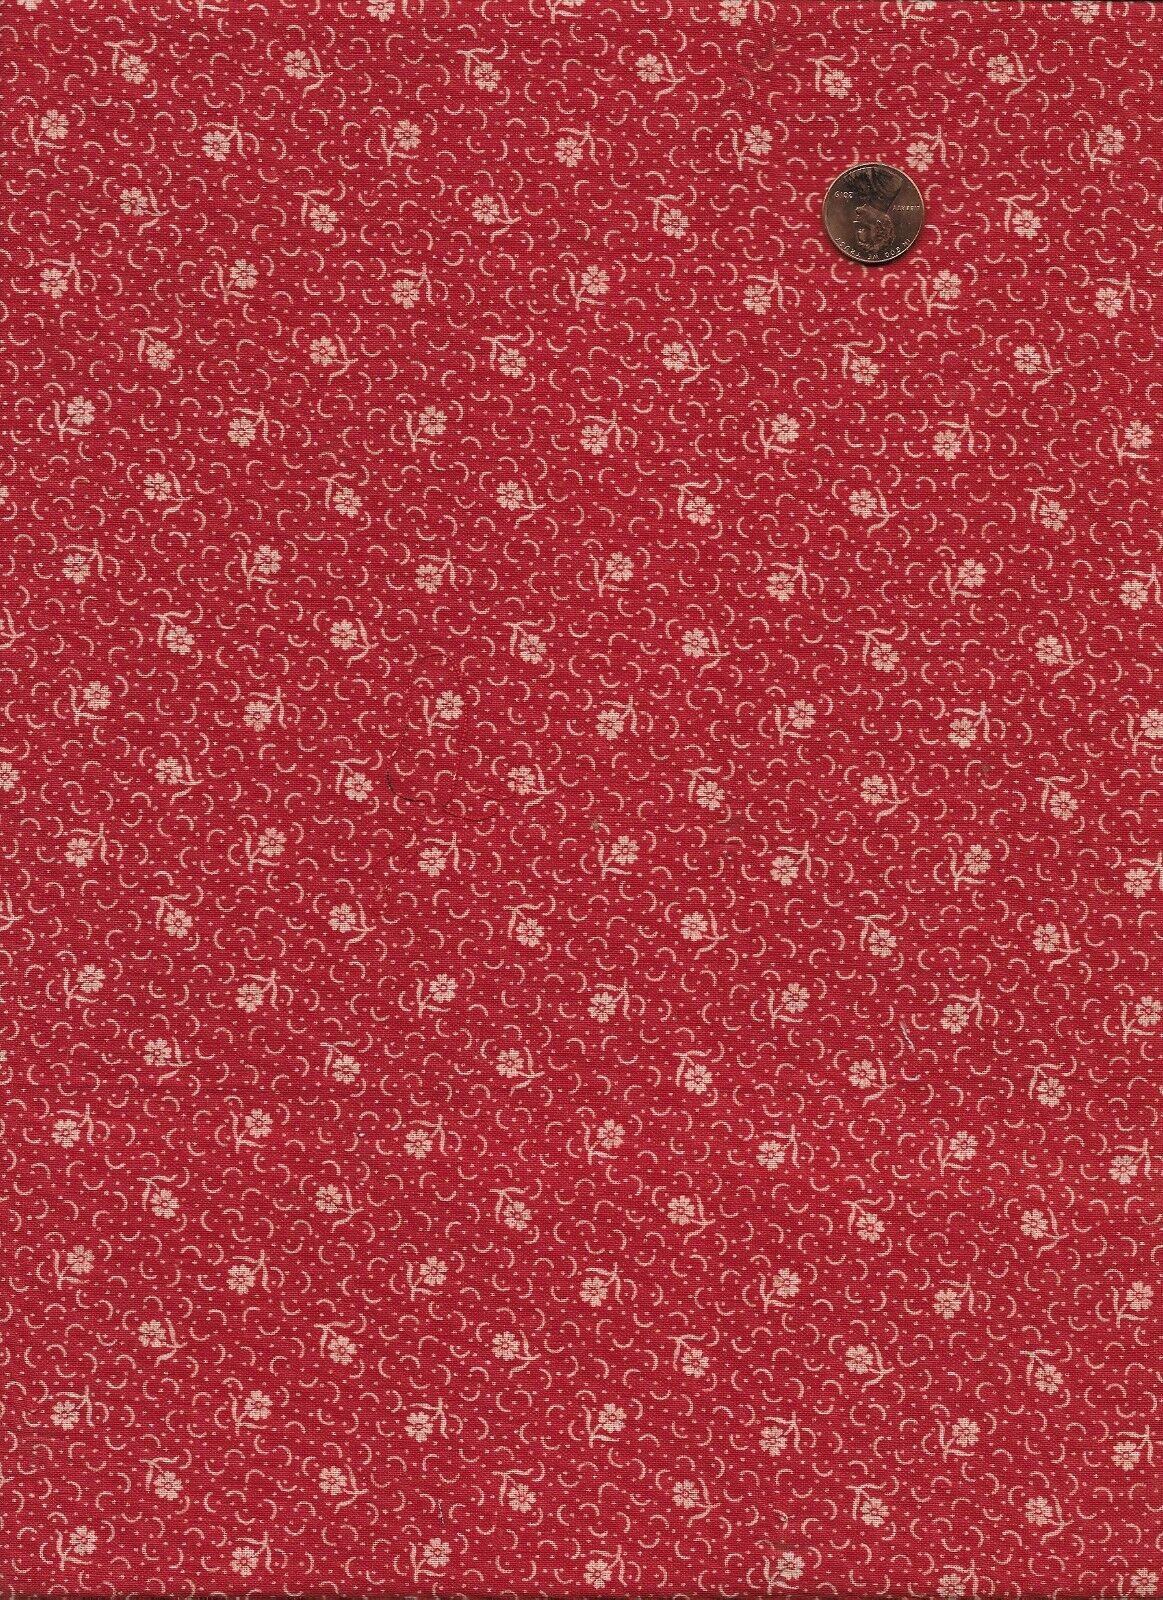 Antique 1870 Red and White Floral Fabric